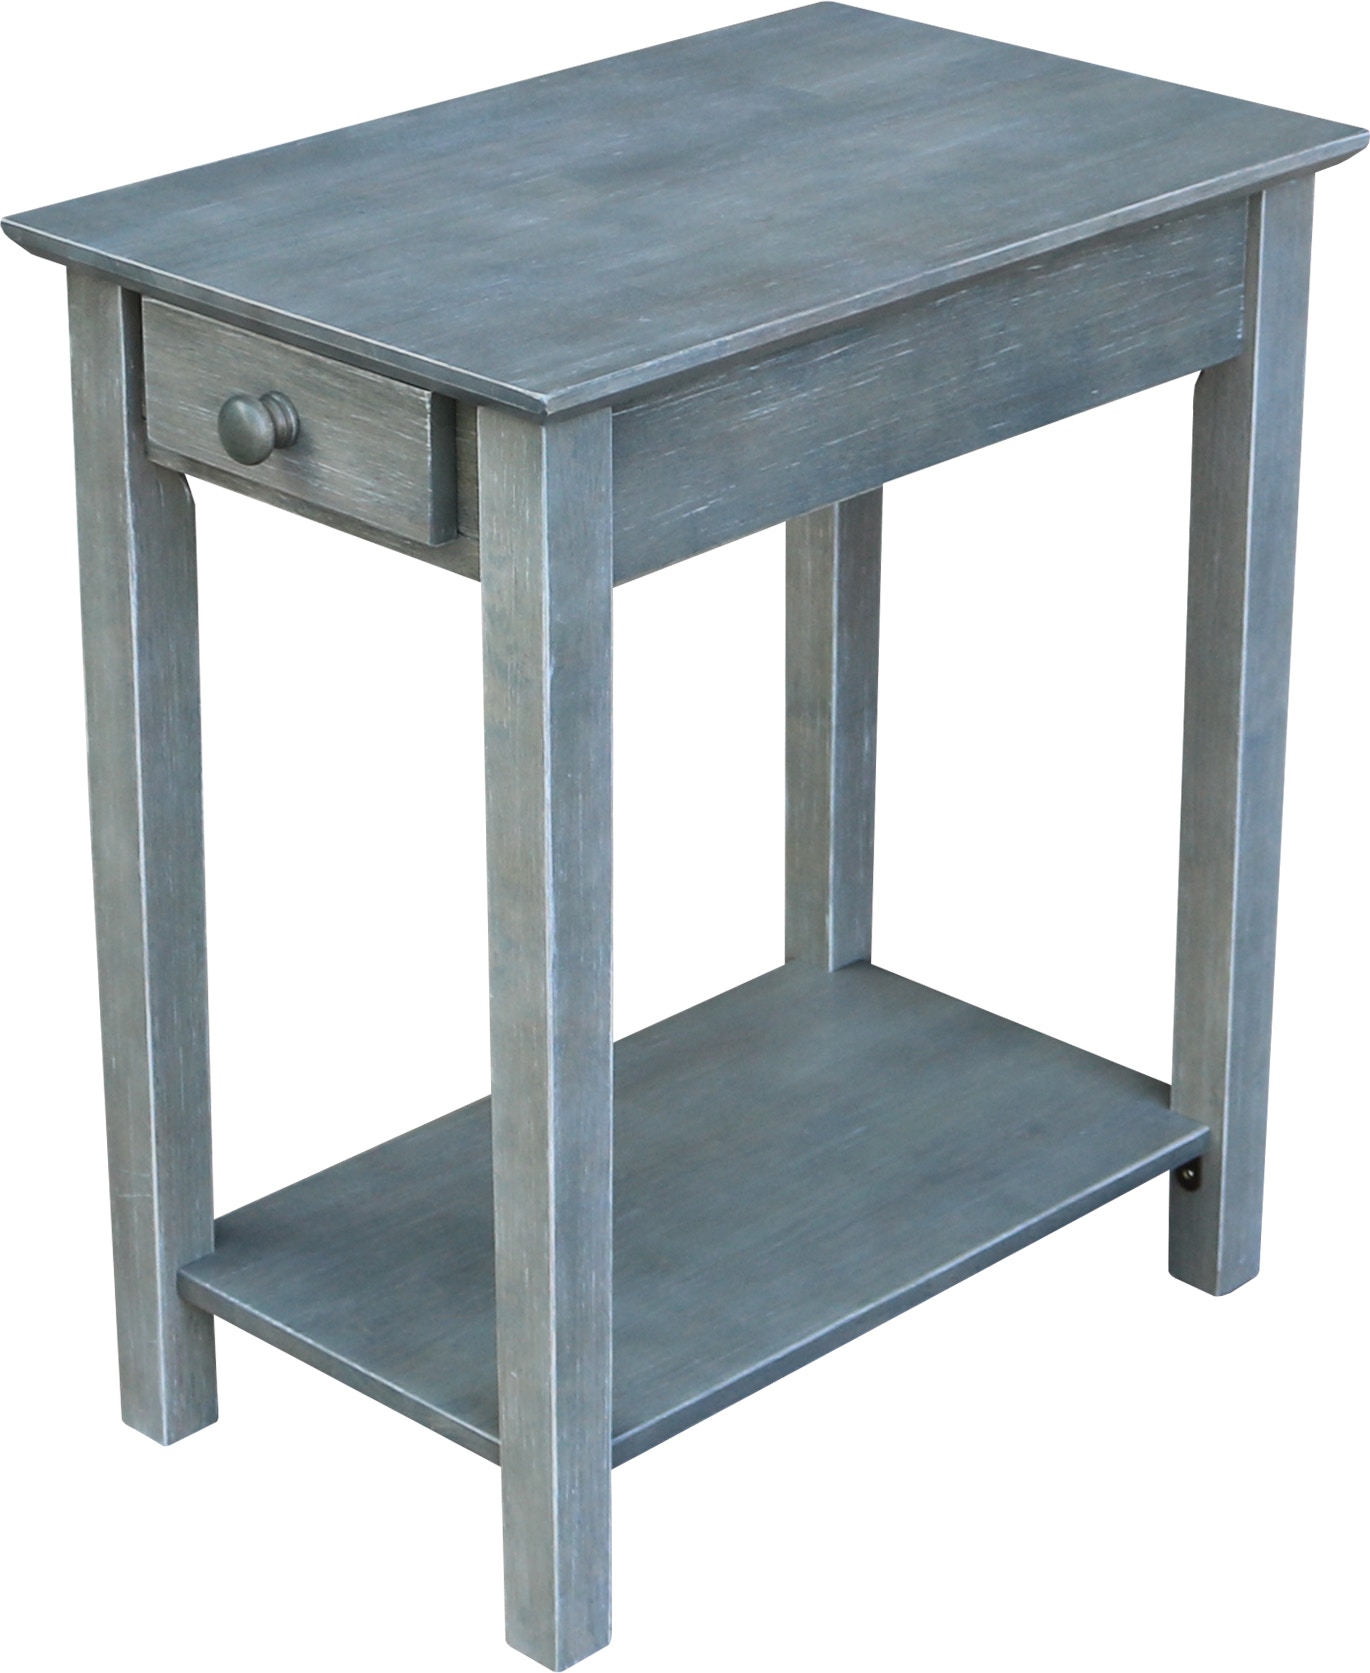 Narrow End Table [4 colors]